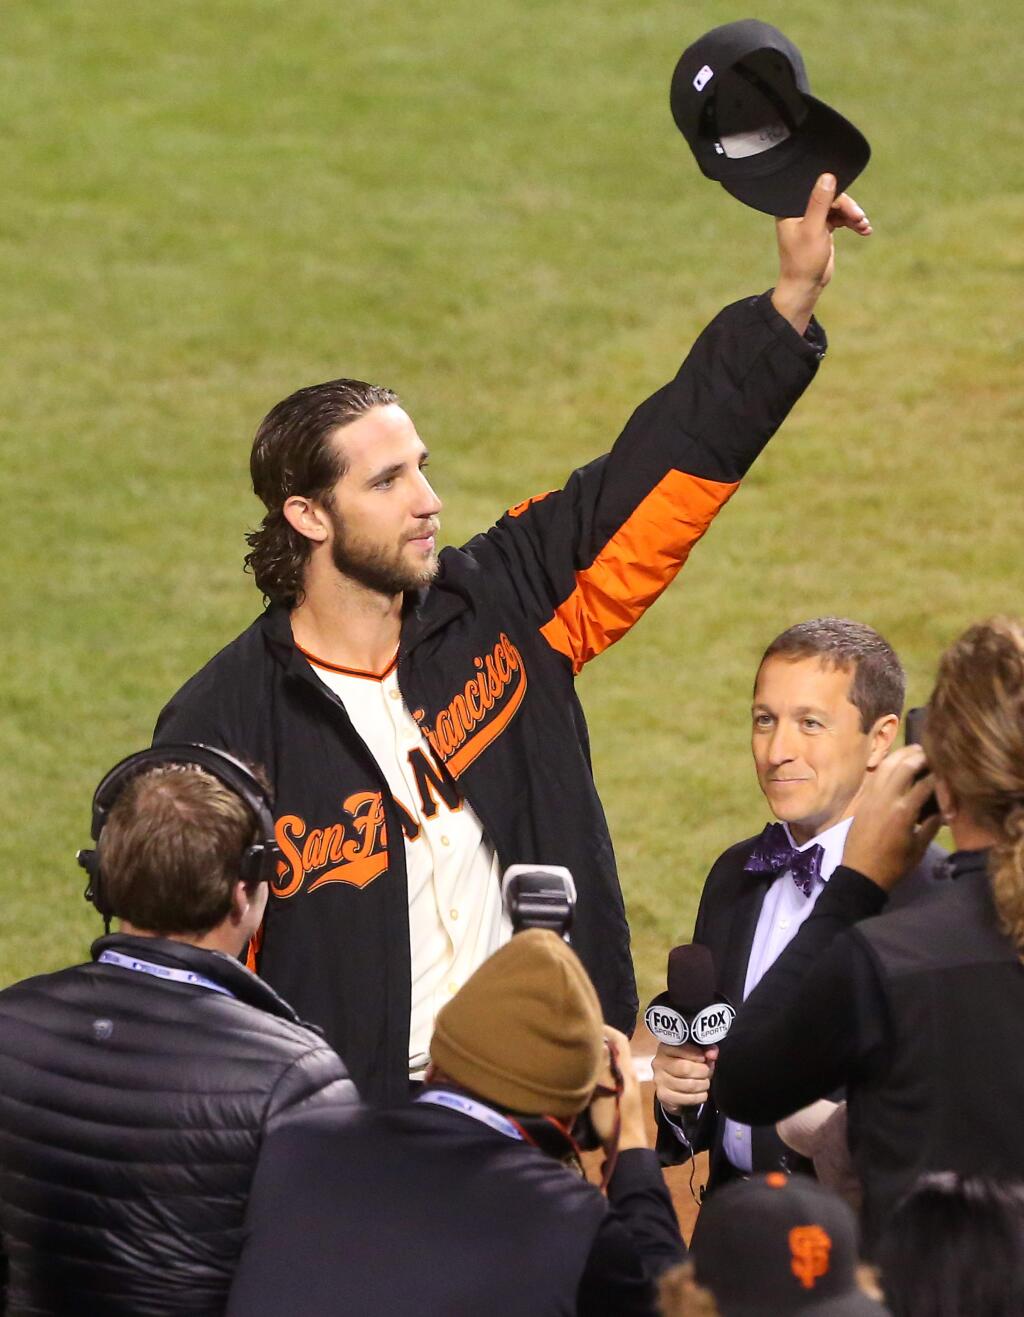 San Francisco Giants starting pitcher Madison Bumgarner tips his hat to the crowd while being interviewed by the media, after pitching a complete game, allowing five hits and no runs, in Game 5 of the World Series in San Francisco on Sunday, October 26, 2014. The Giants defeated the Royals 5-0. (Christopher Chung / The Press Democrat)